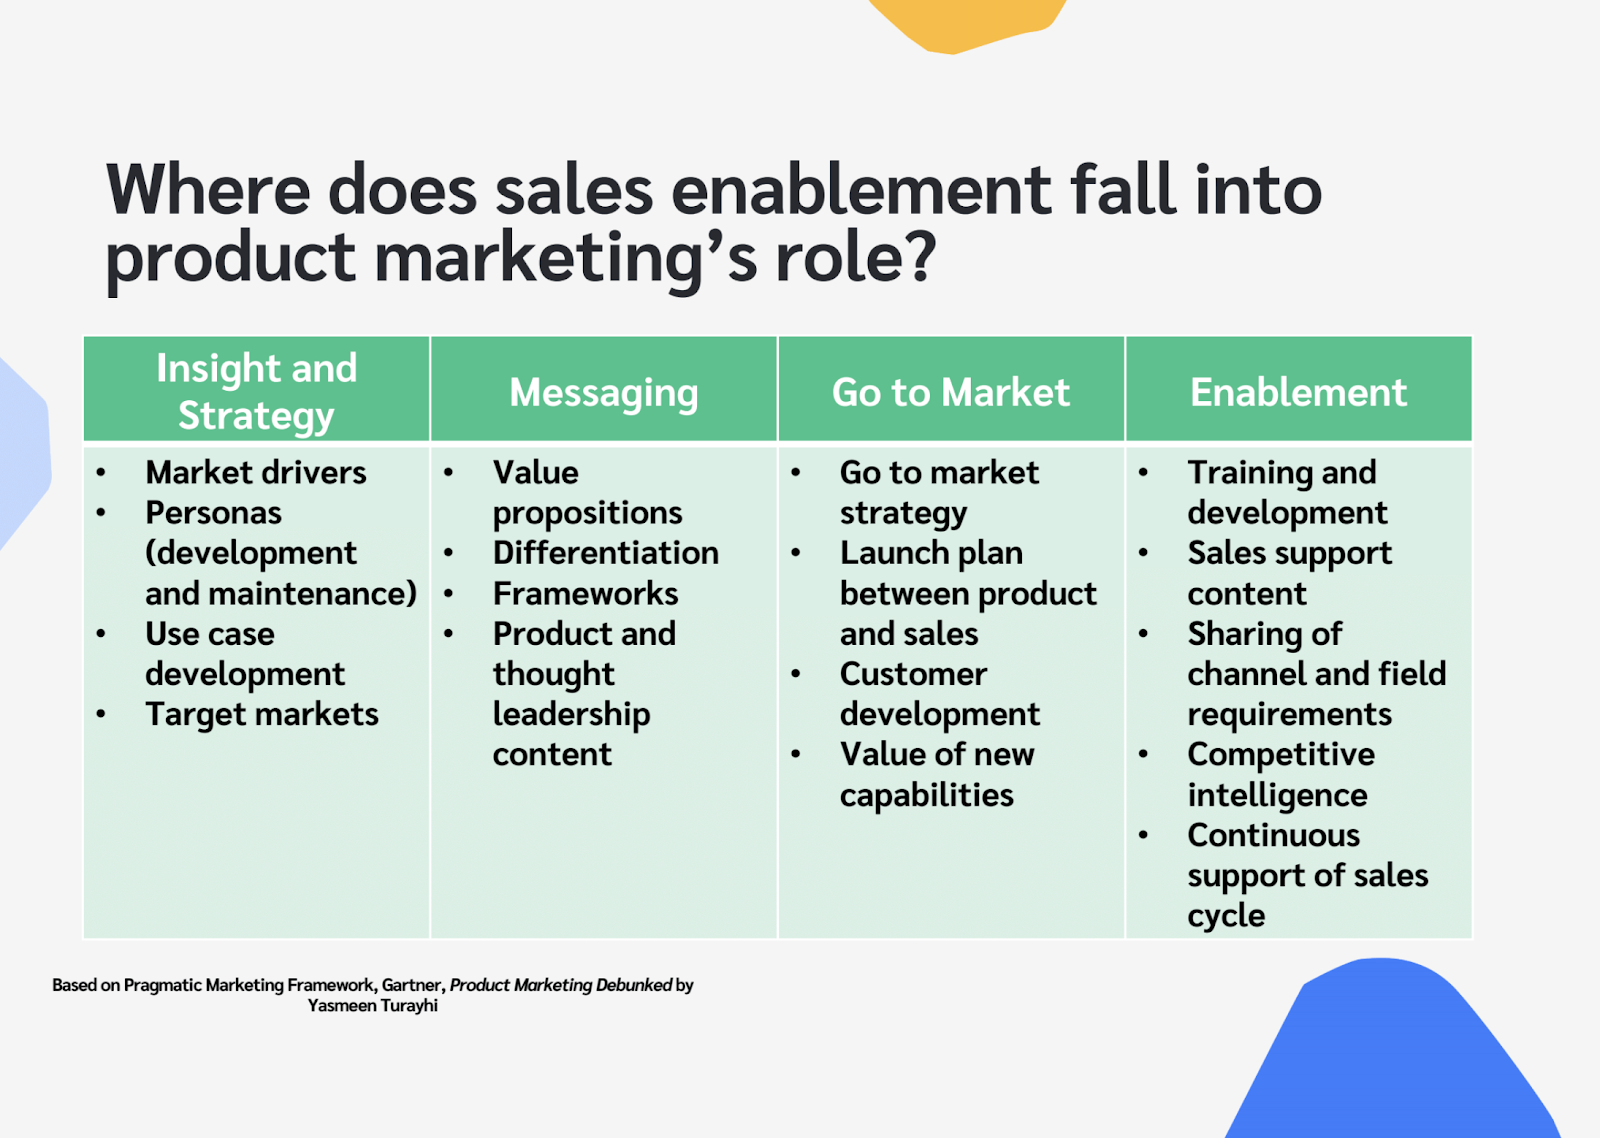 Sales enablement fits into several areas, including: insight and strategy, messaging, go-to-market, and enablement.